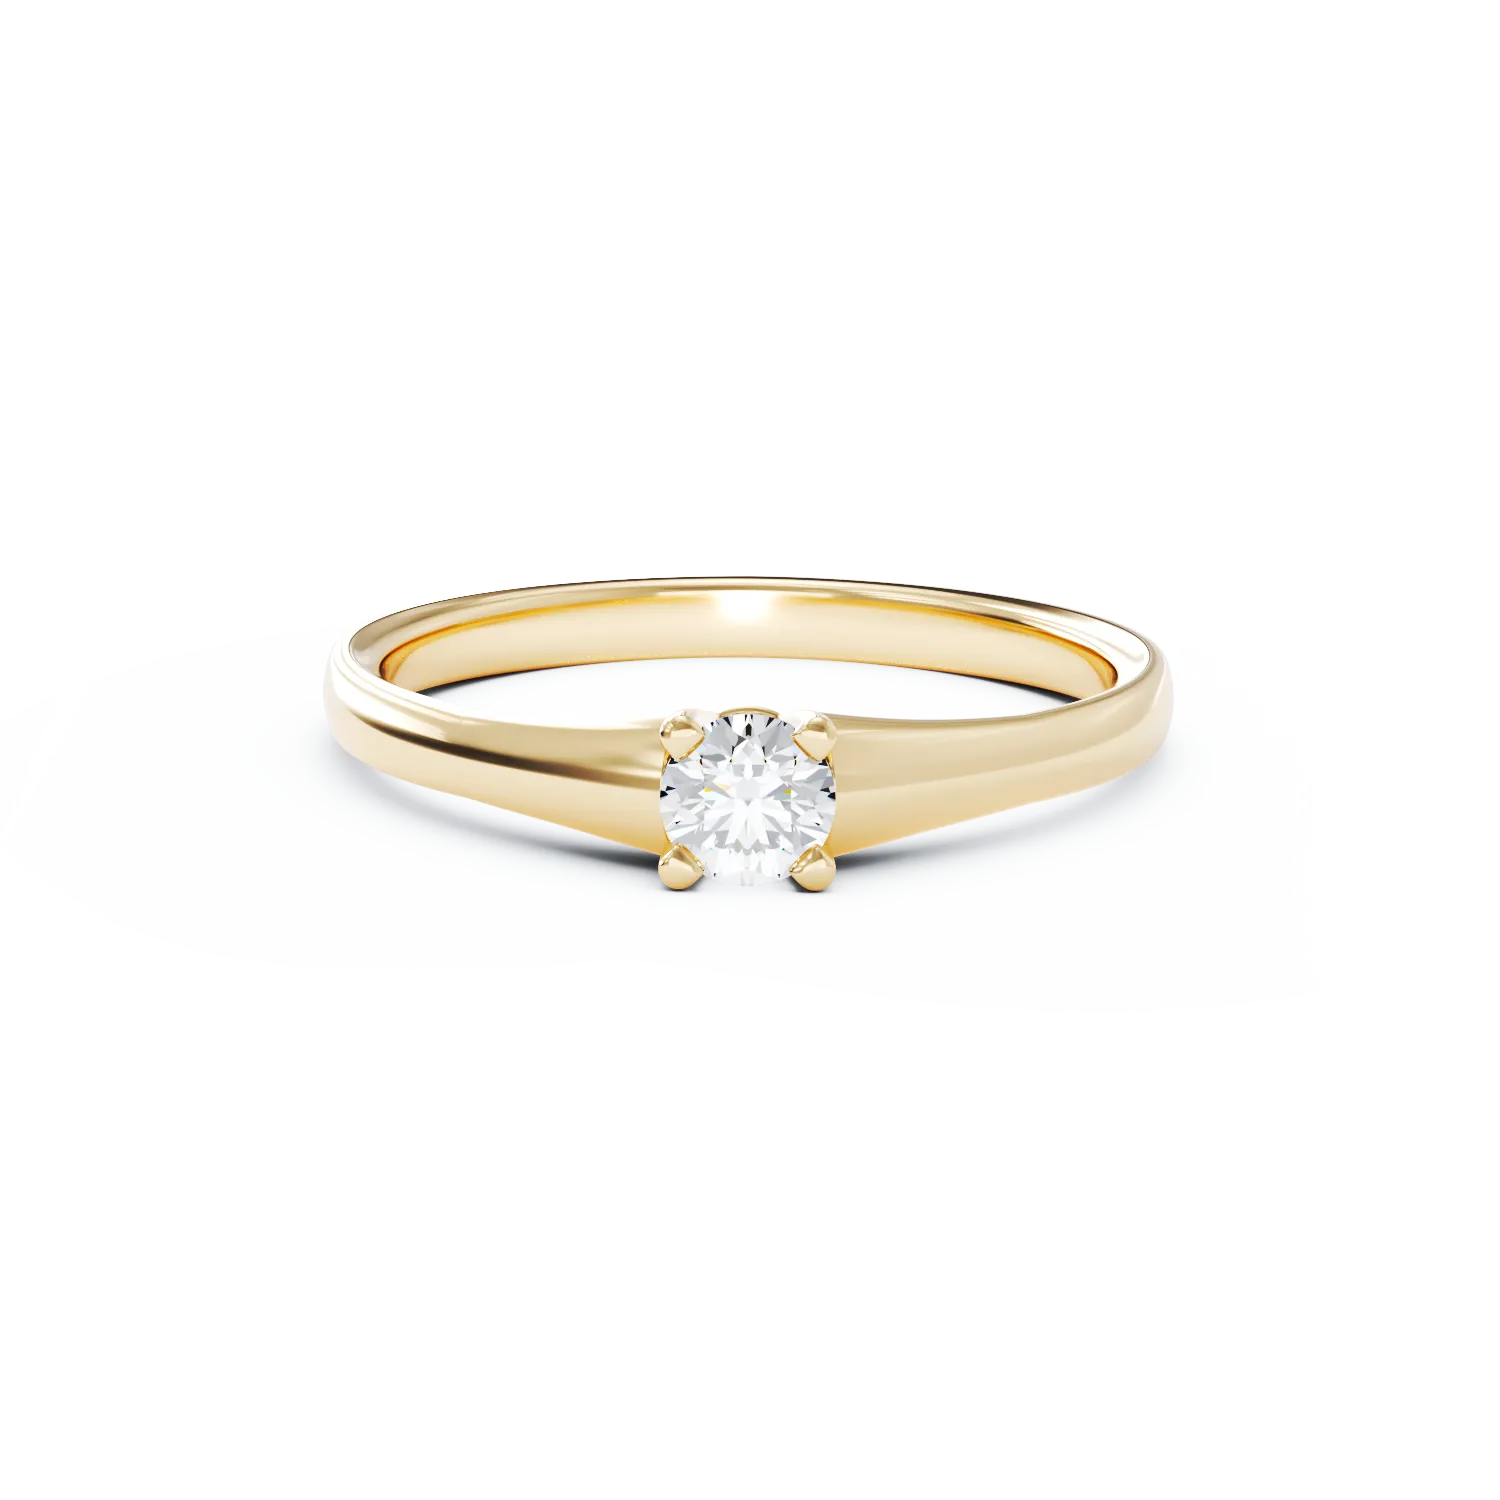 Yellow gold engagement ring with 0.2ct solitaire diamond